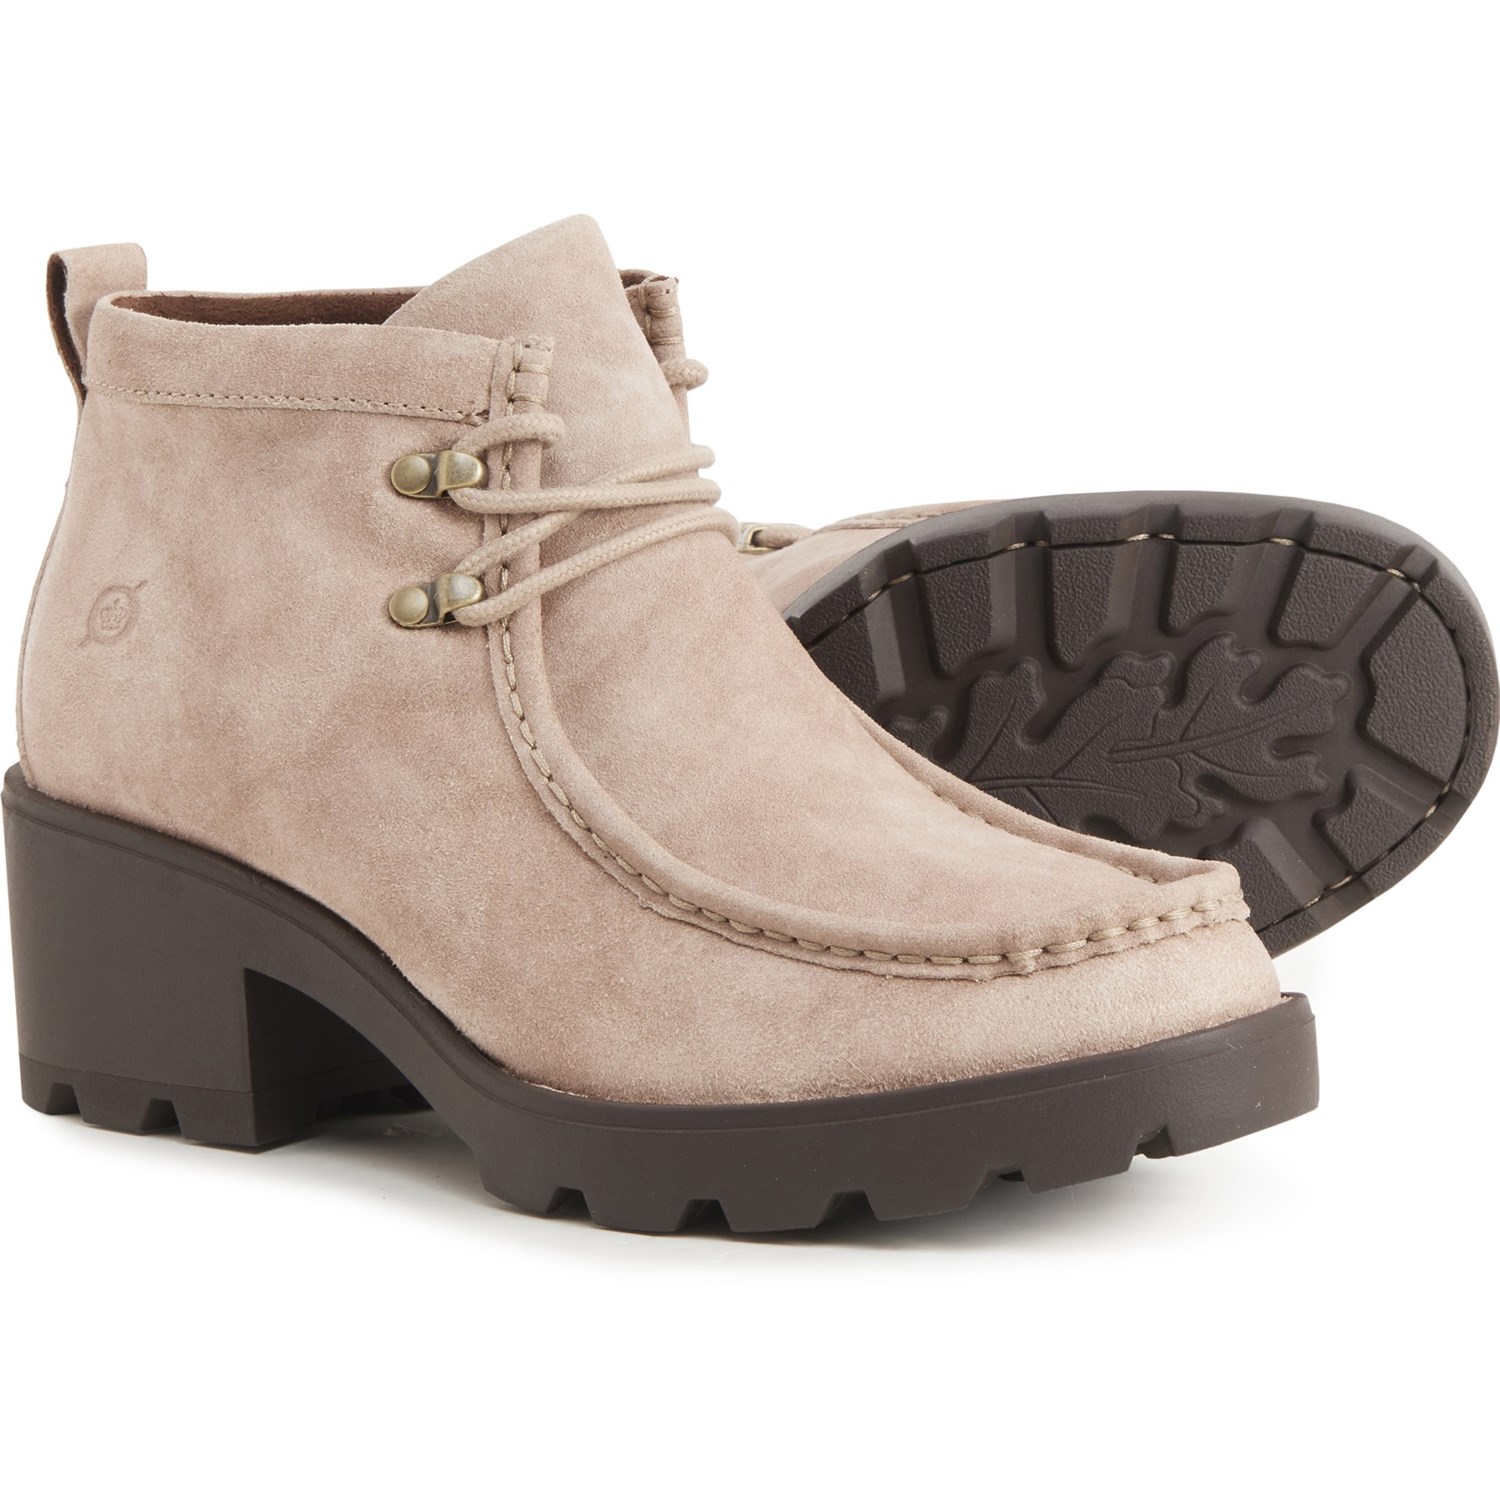 Born Griffin Boots (For Women) - Save 45%